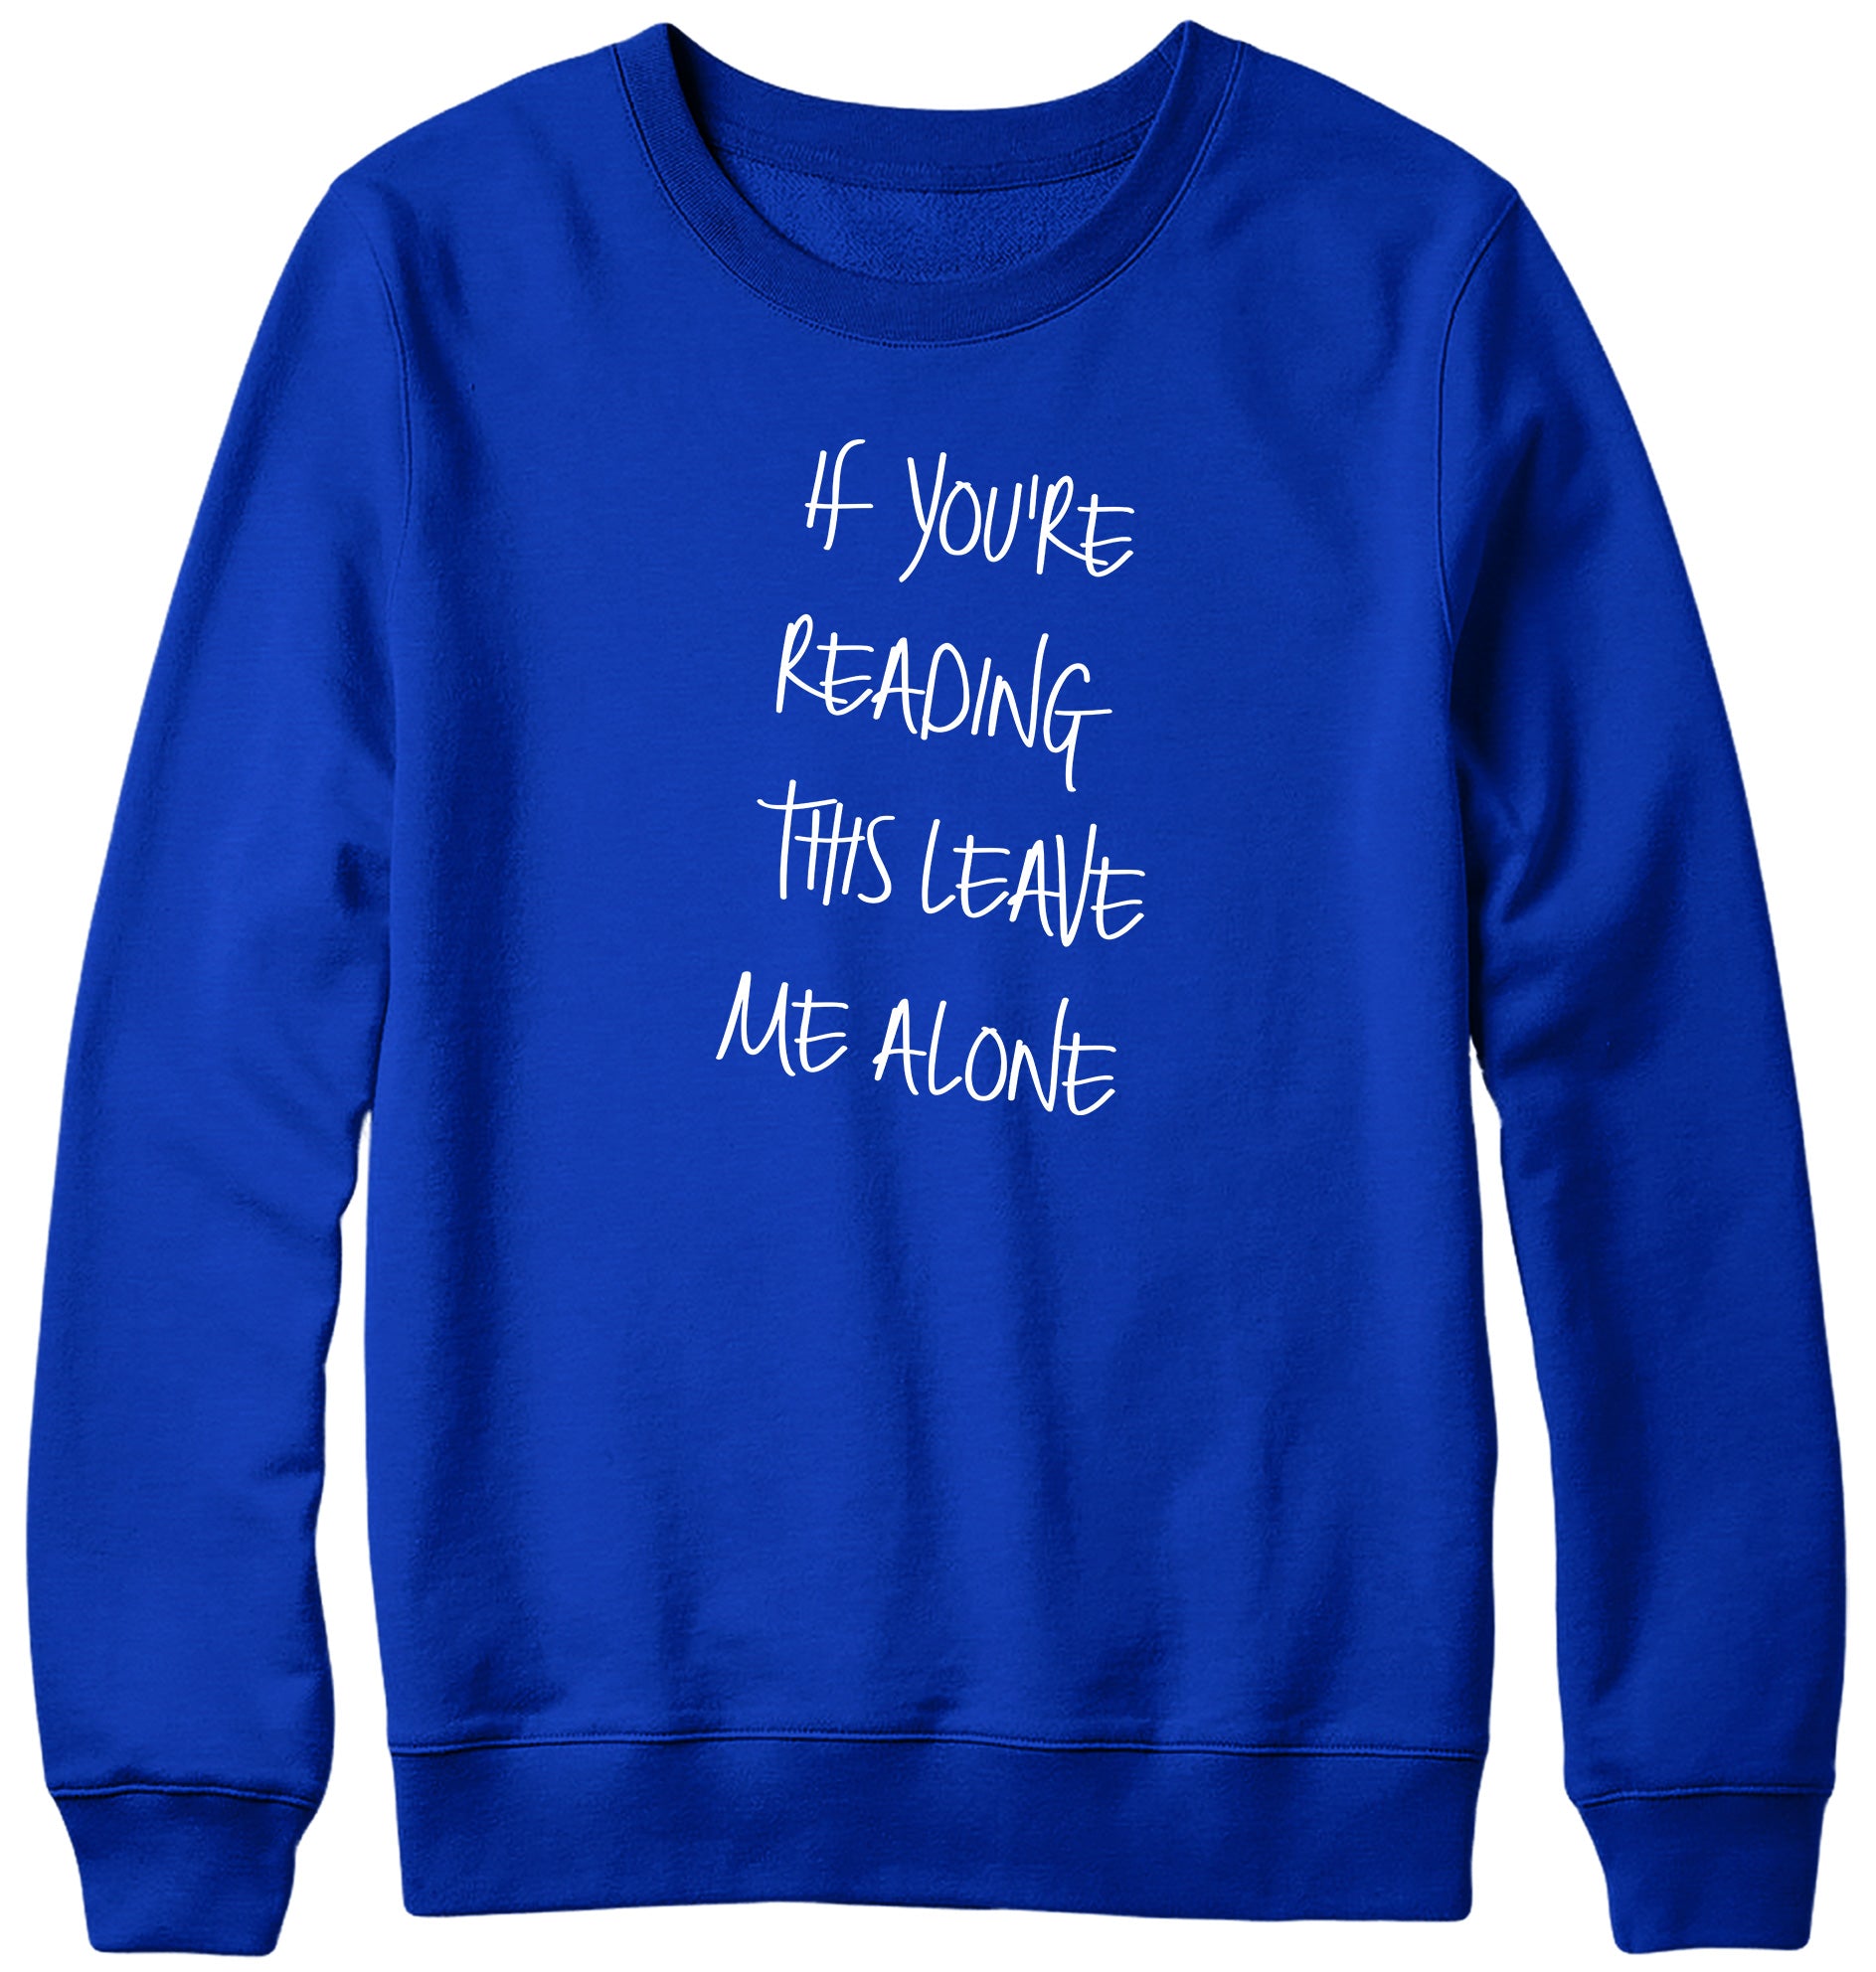 IF YOU ARE READING THIS LEAVE ME ALONE MENS LADIES WOMENS UNISEX SWEATSHIRT SWEATER